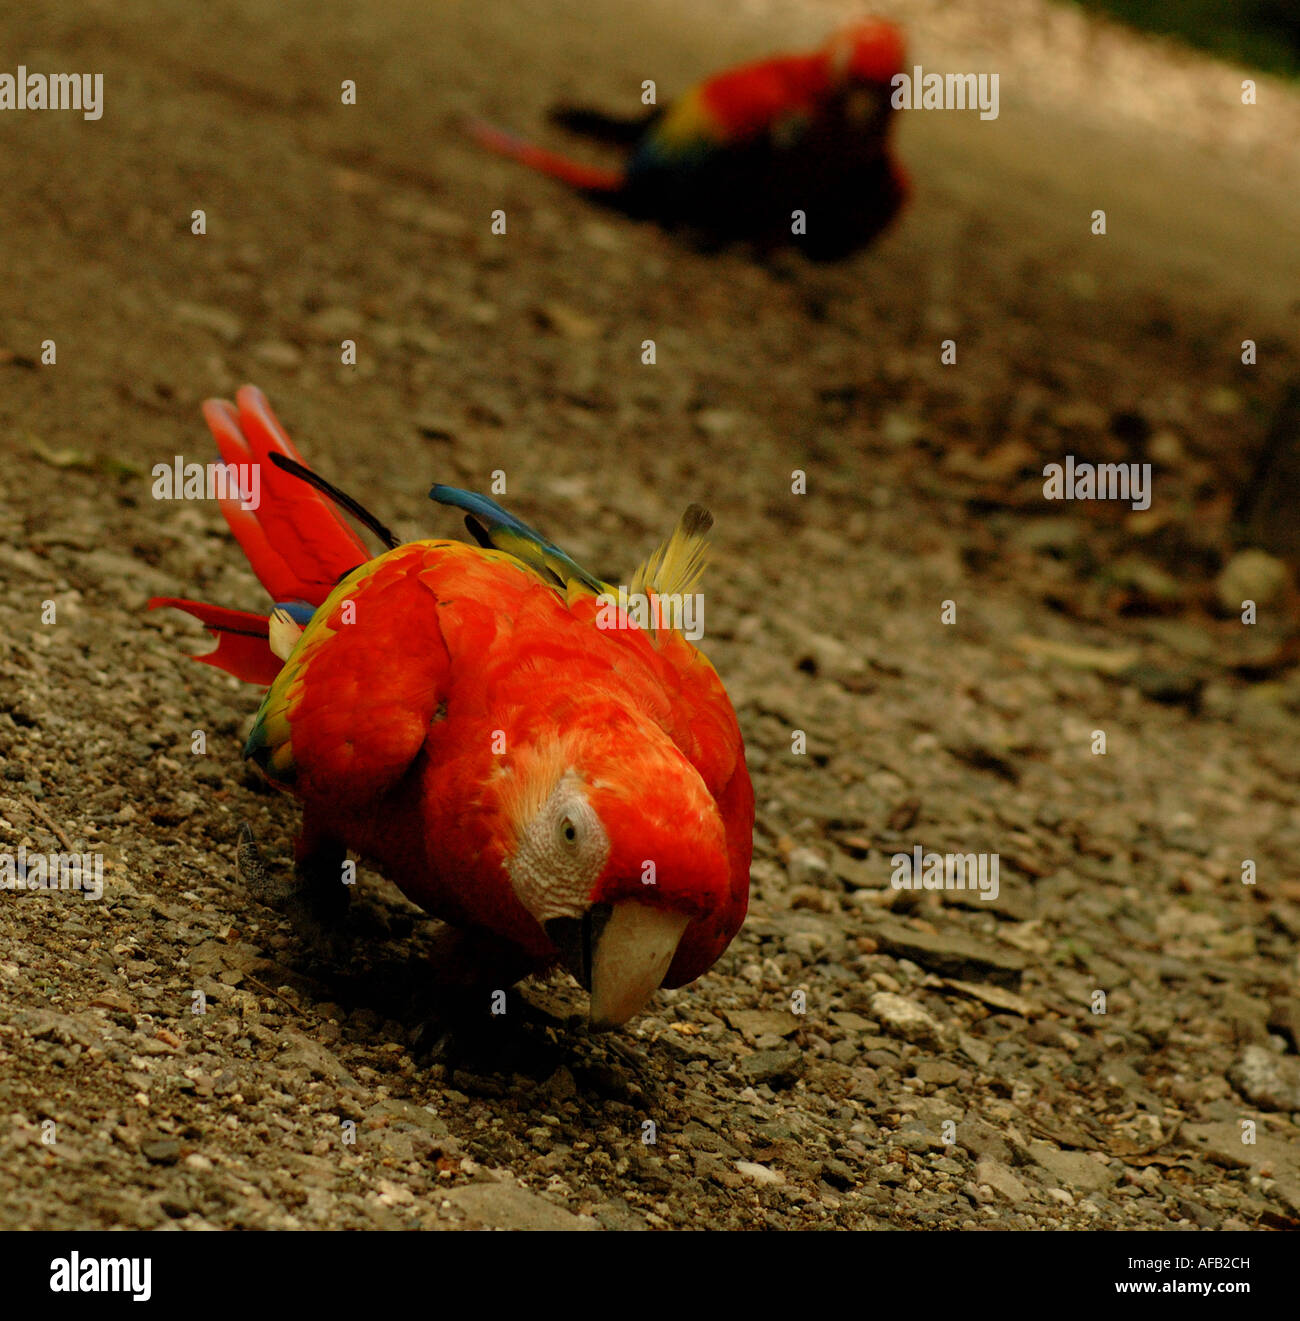 Two scarlet macaws searching for seeds on the ground Stock Photo